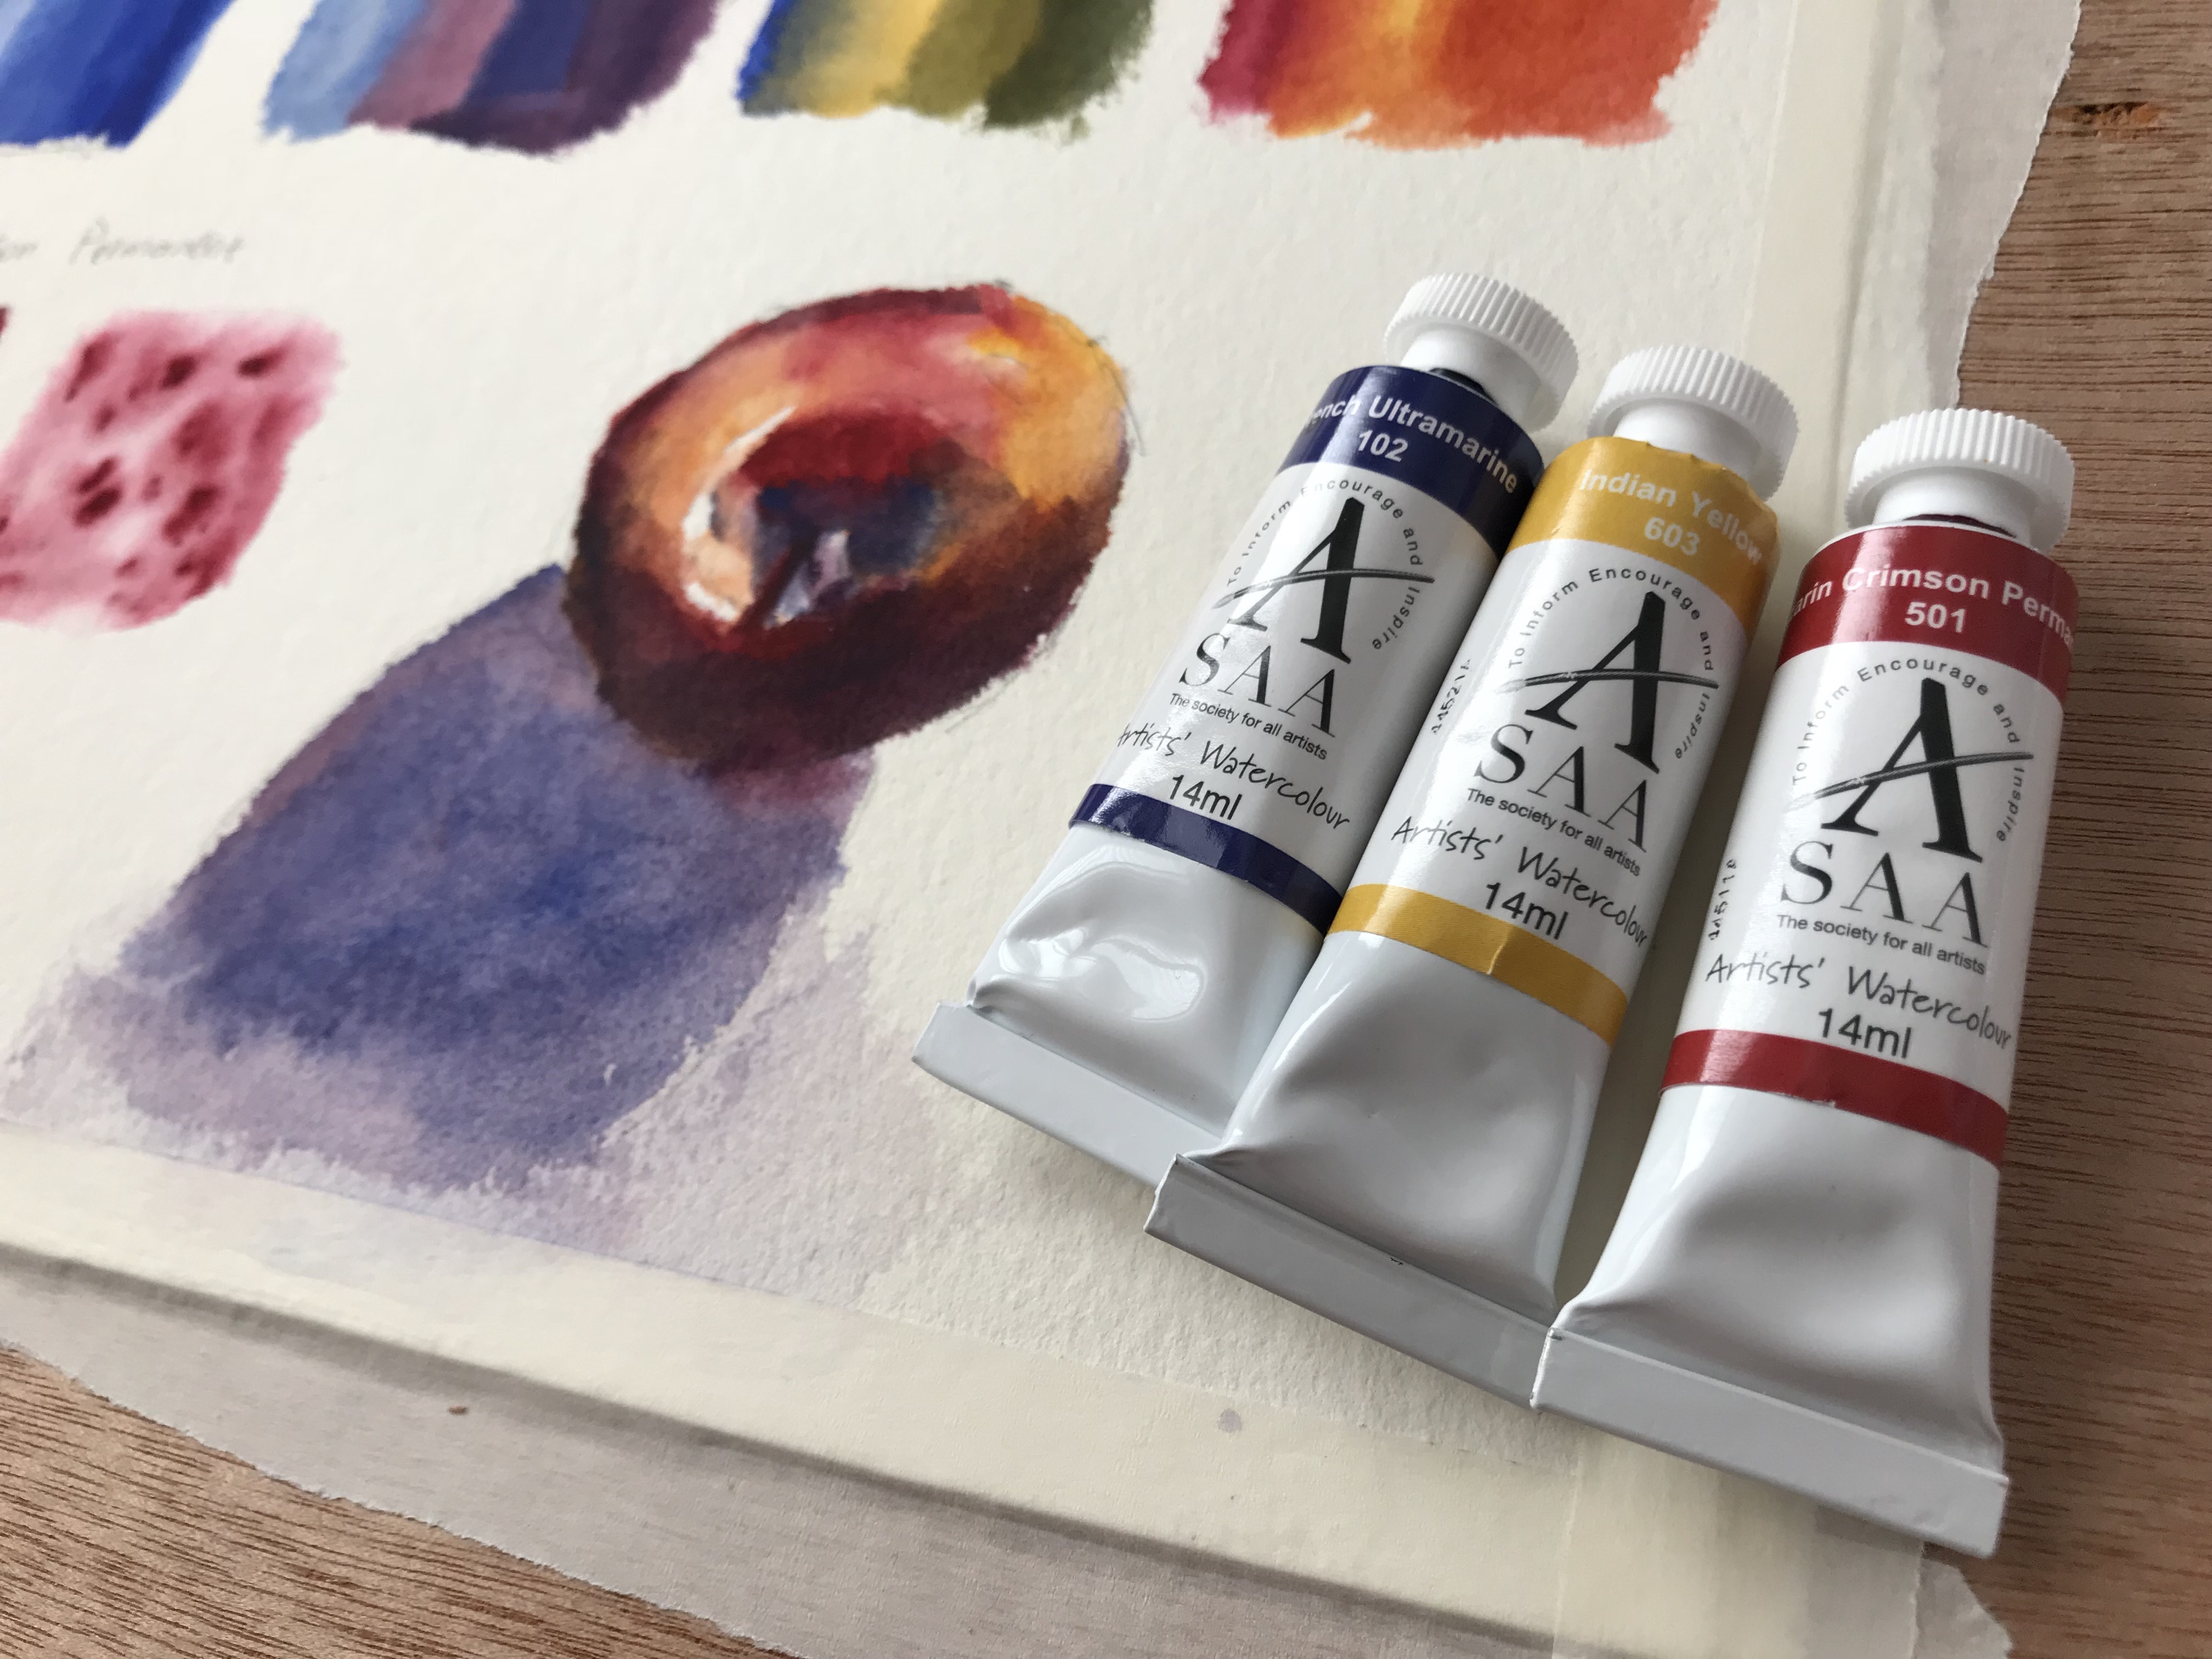 The three SAA watercolor paint tubes, next to the still-life painting